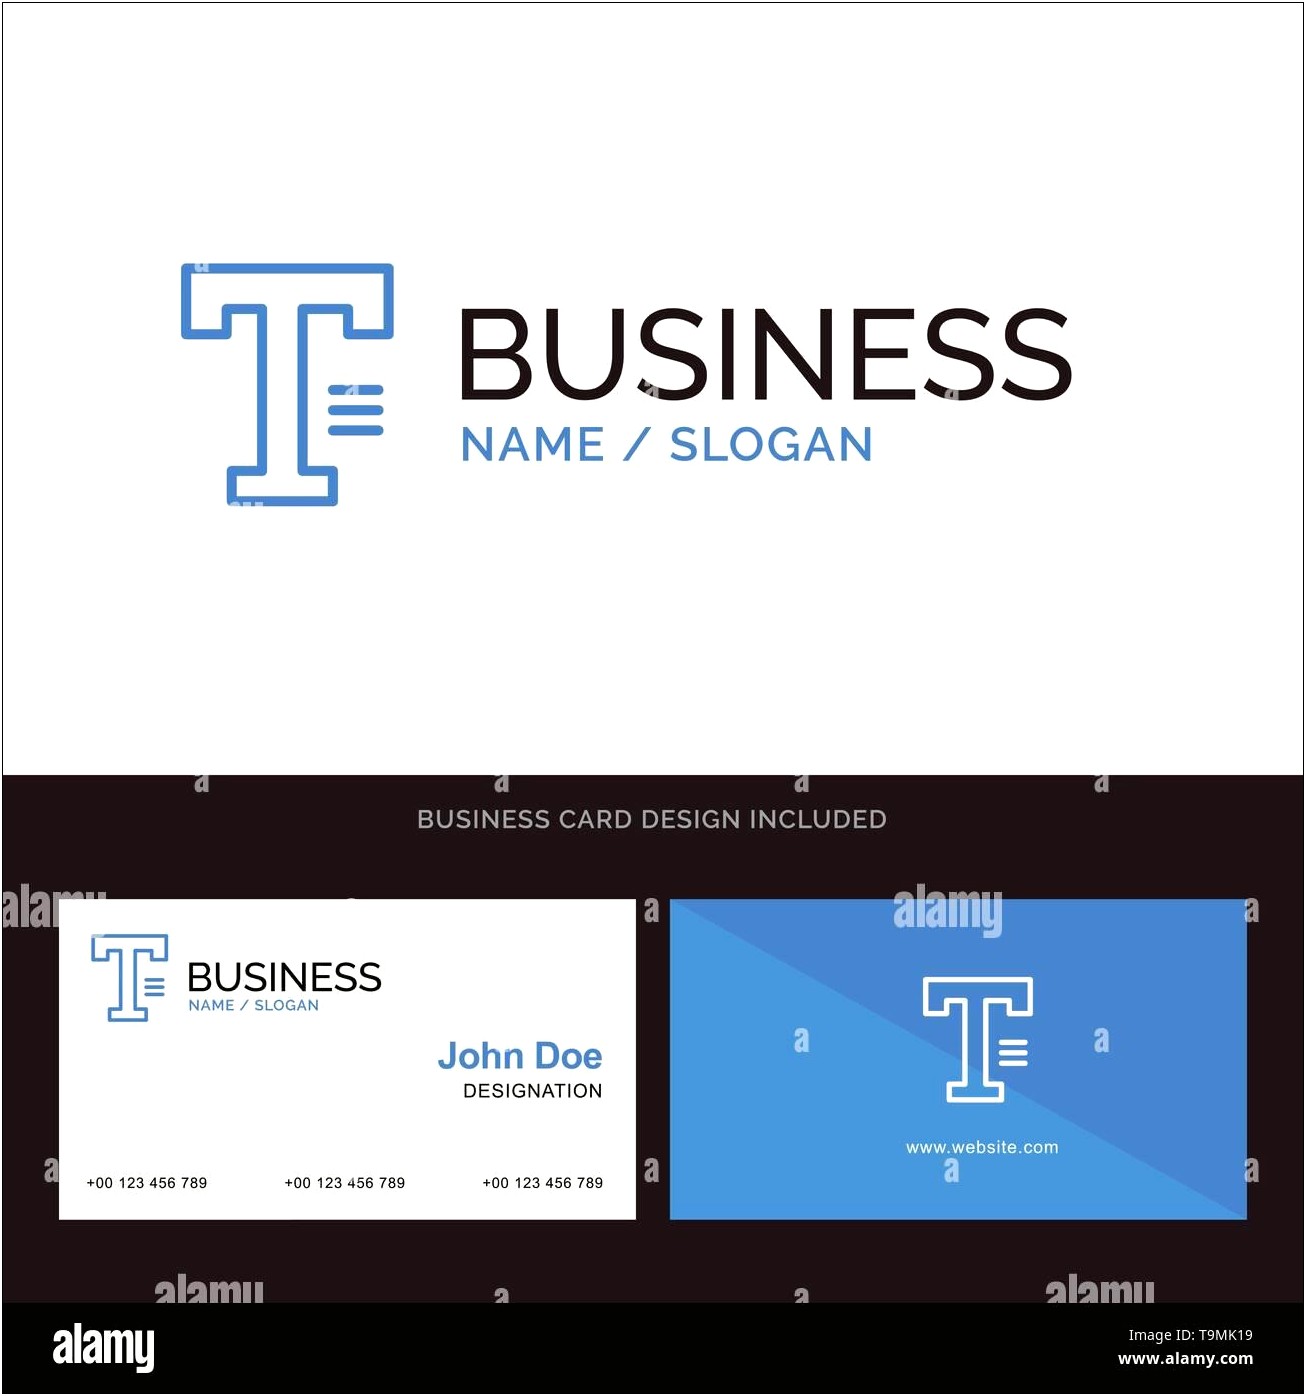 Business Card Template With Logo And Photo Word